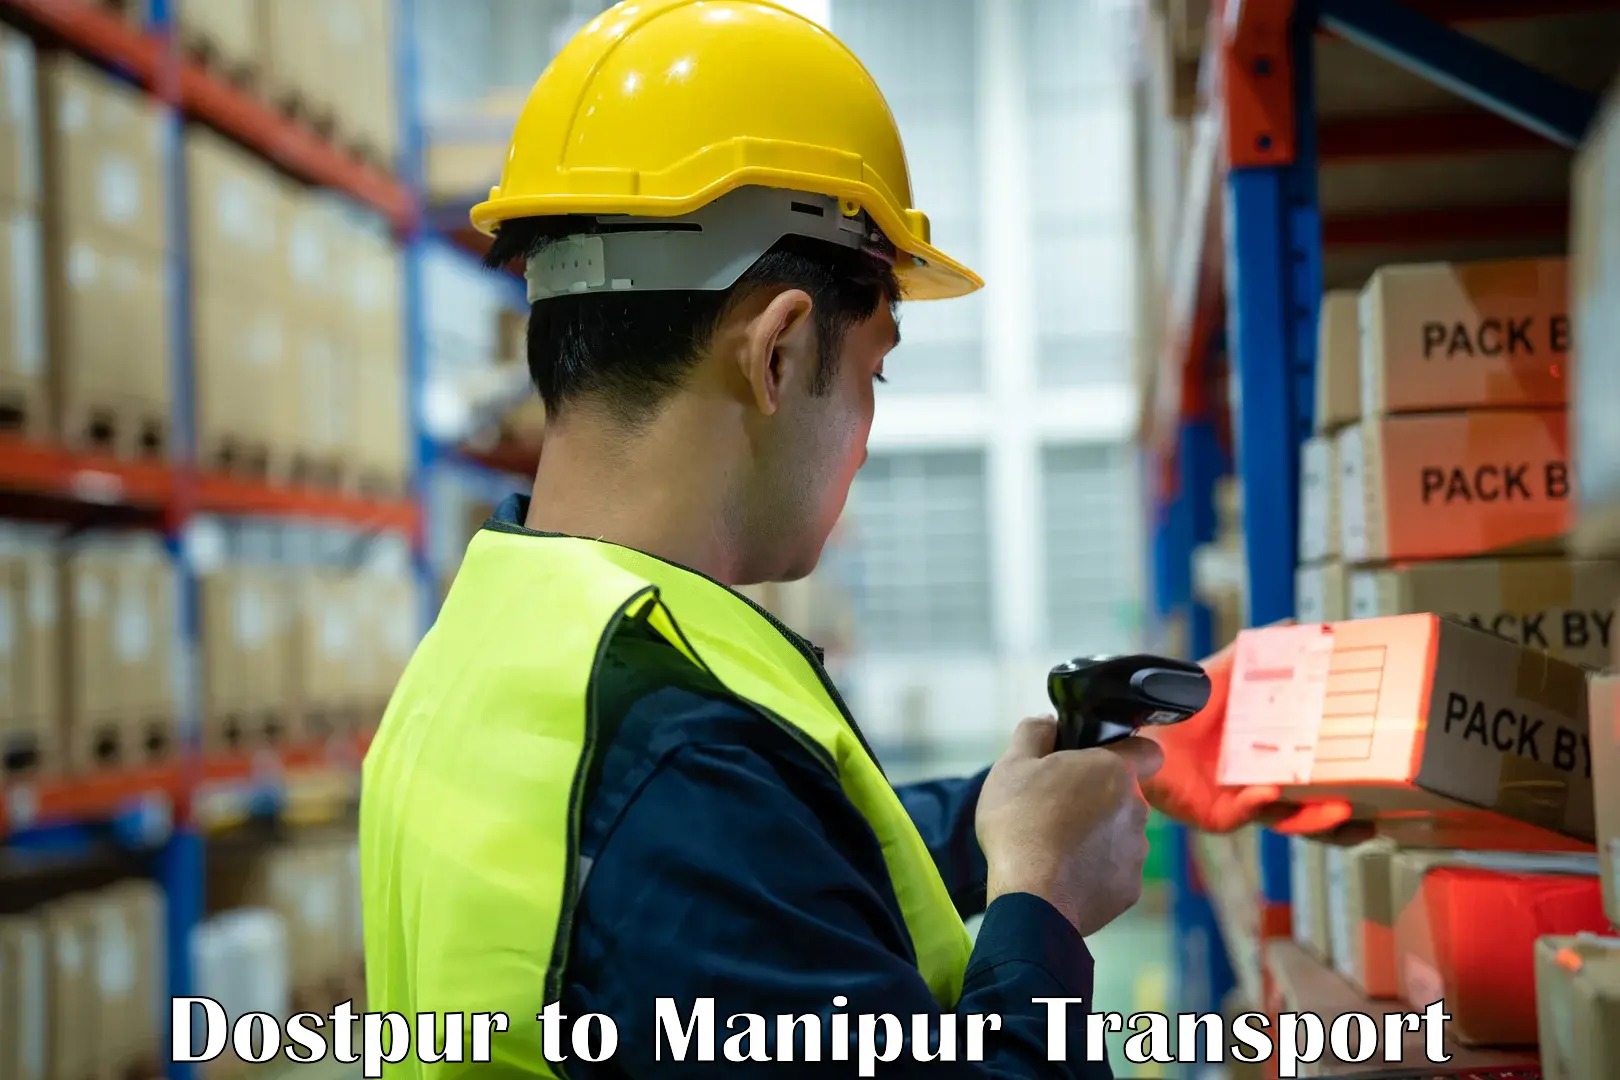 Domestic transport services in Dostpur to Manipur